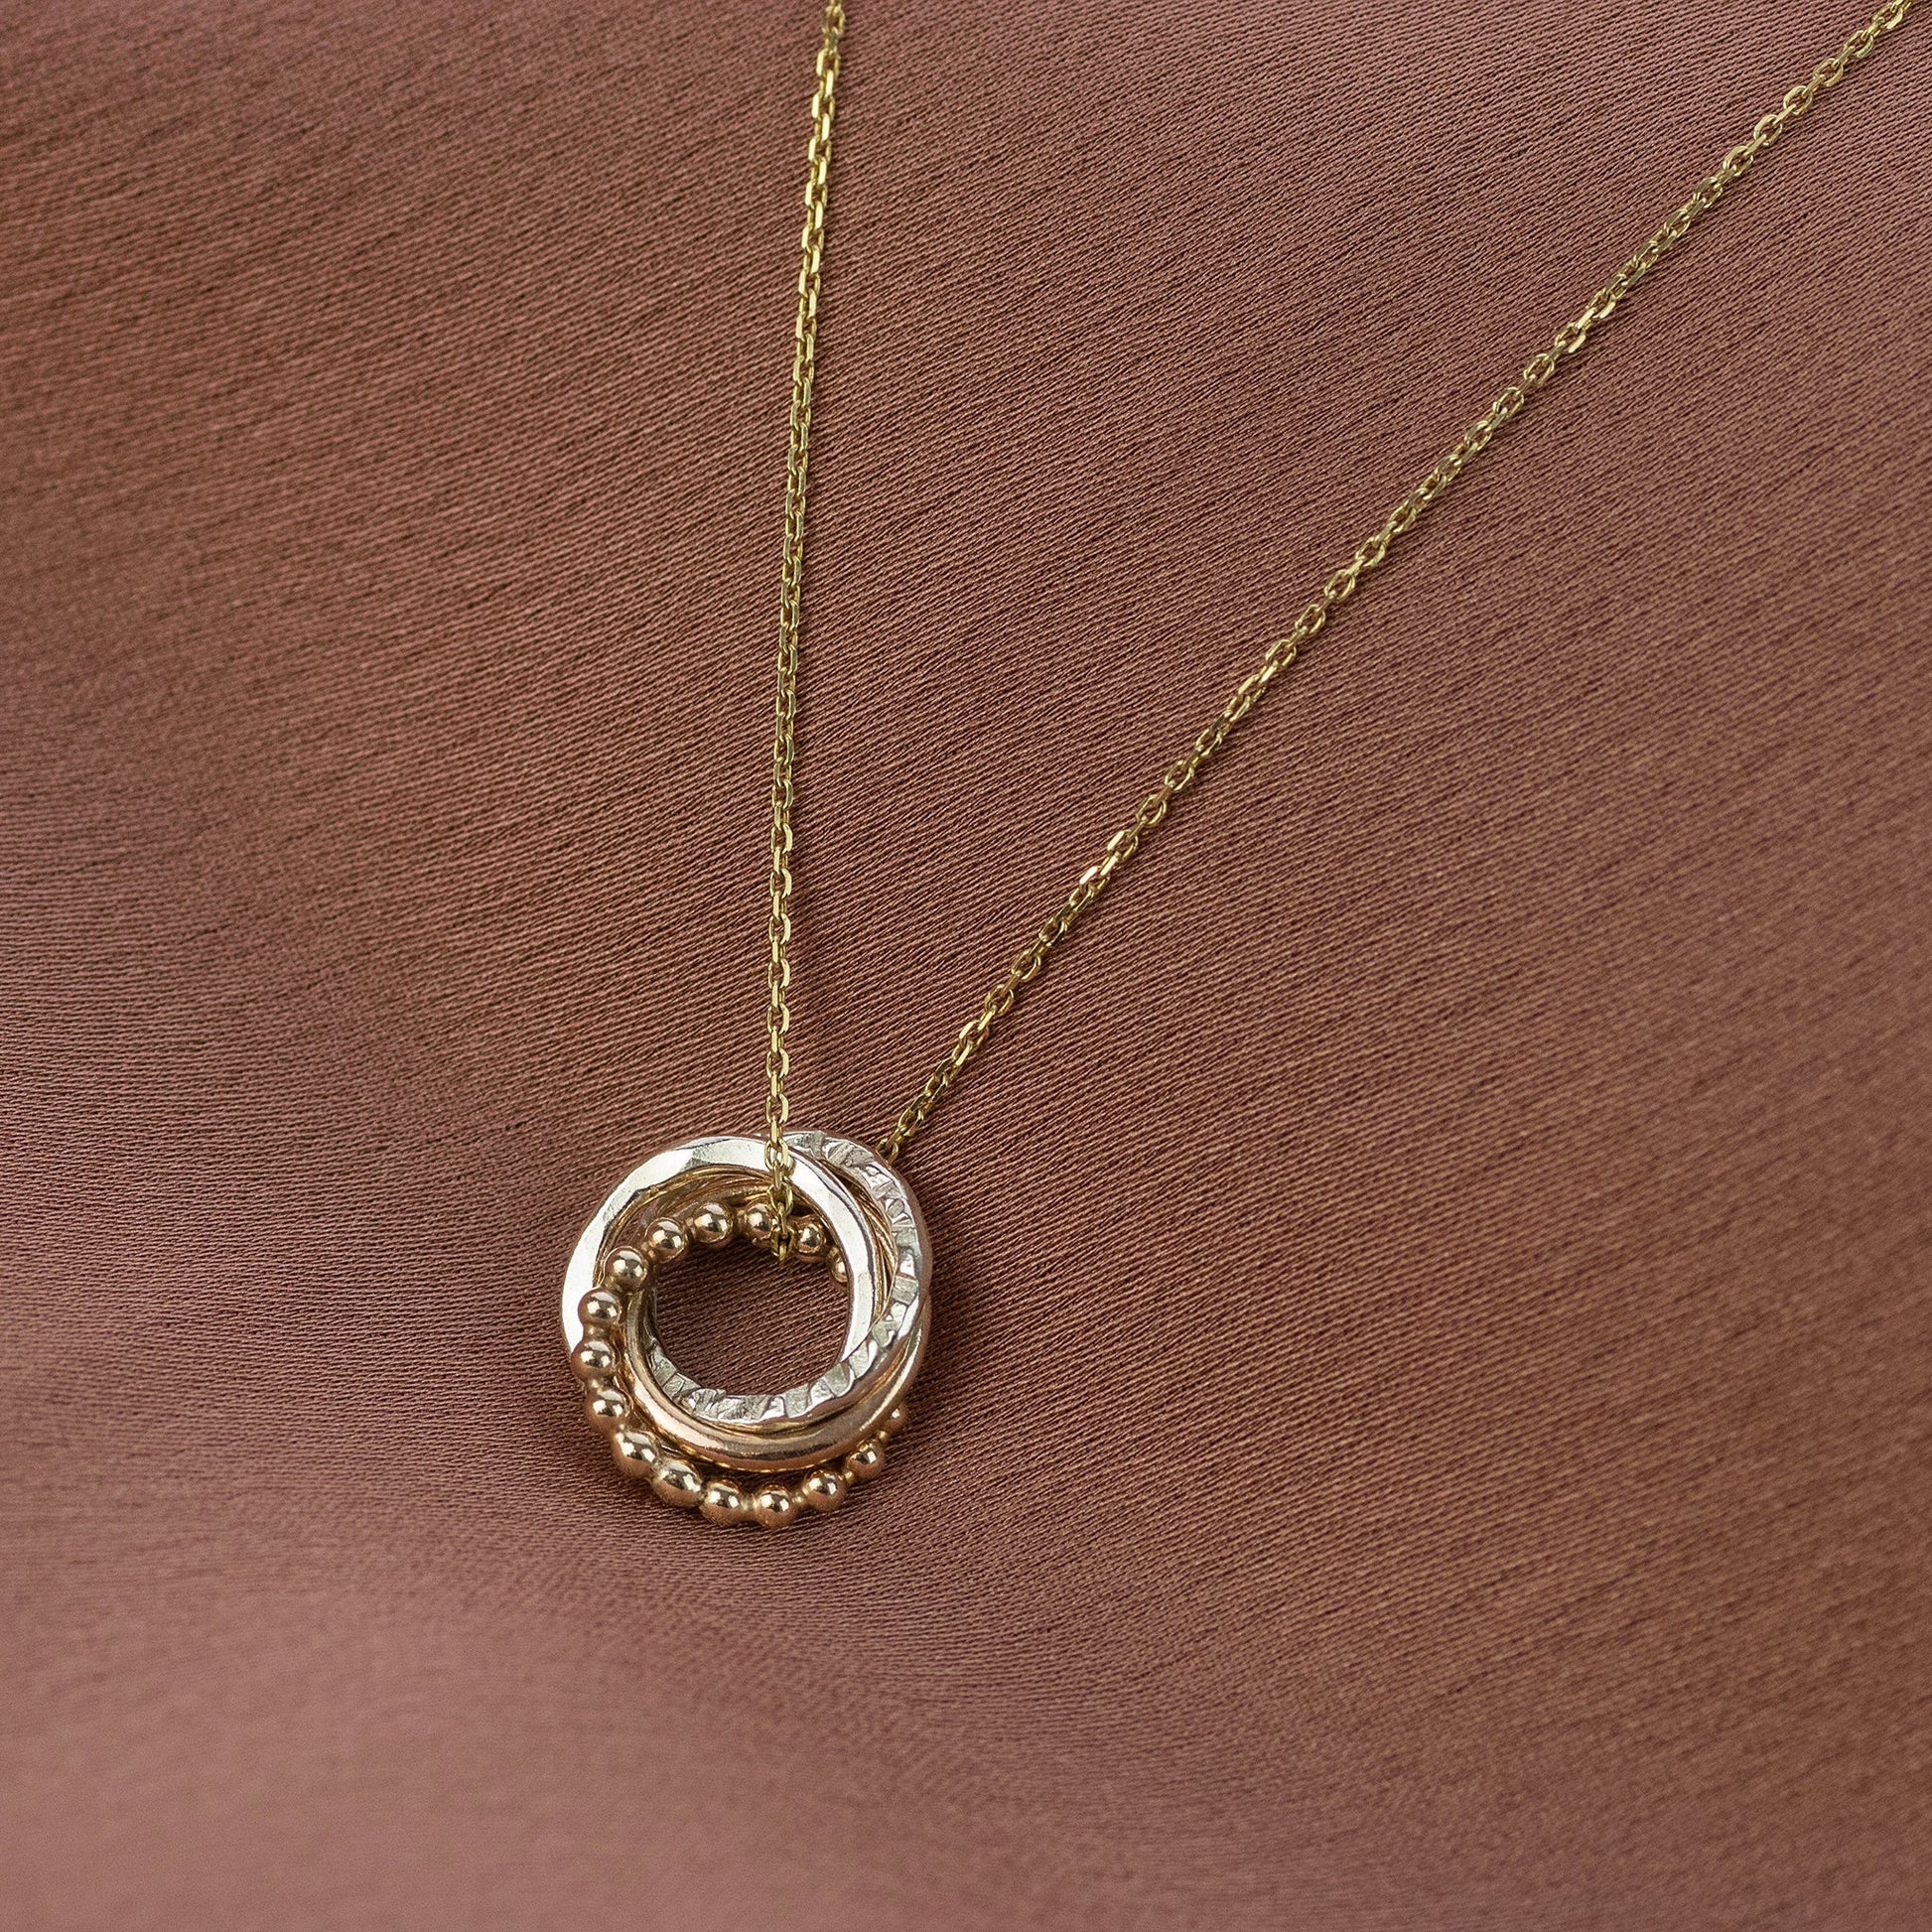 4 Cousins Necklace - 9kt Gold, Rose Gold & Silver Love Knot